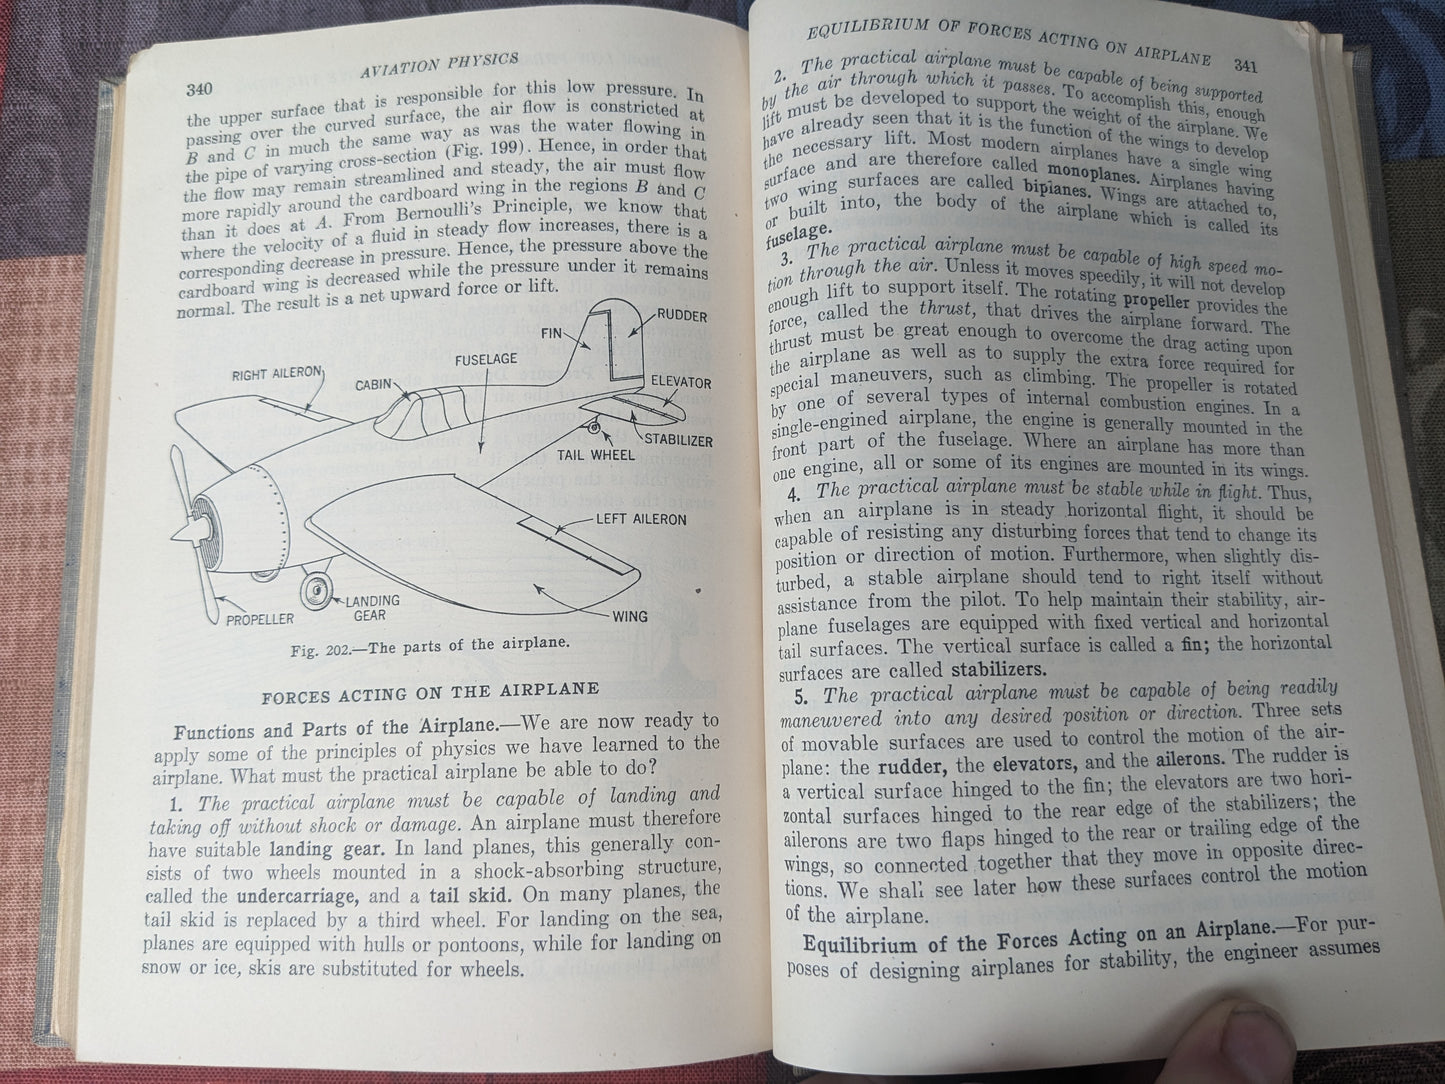 Visualized Physics, Including an Introduction to Aviation Physics by Alexander Taffel